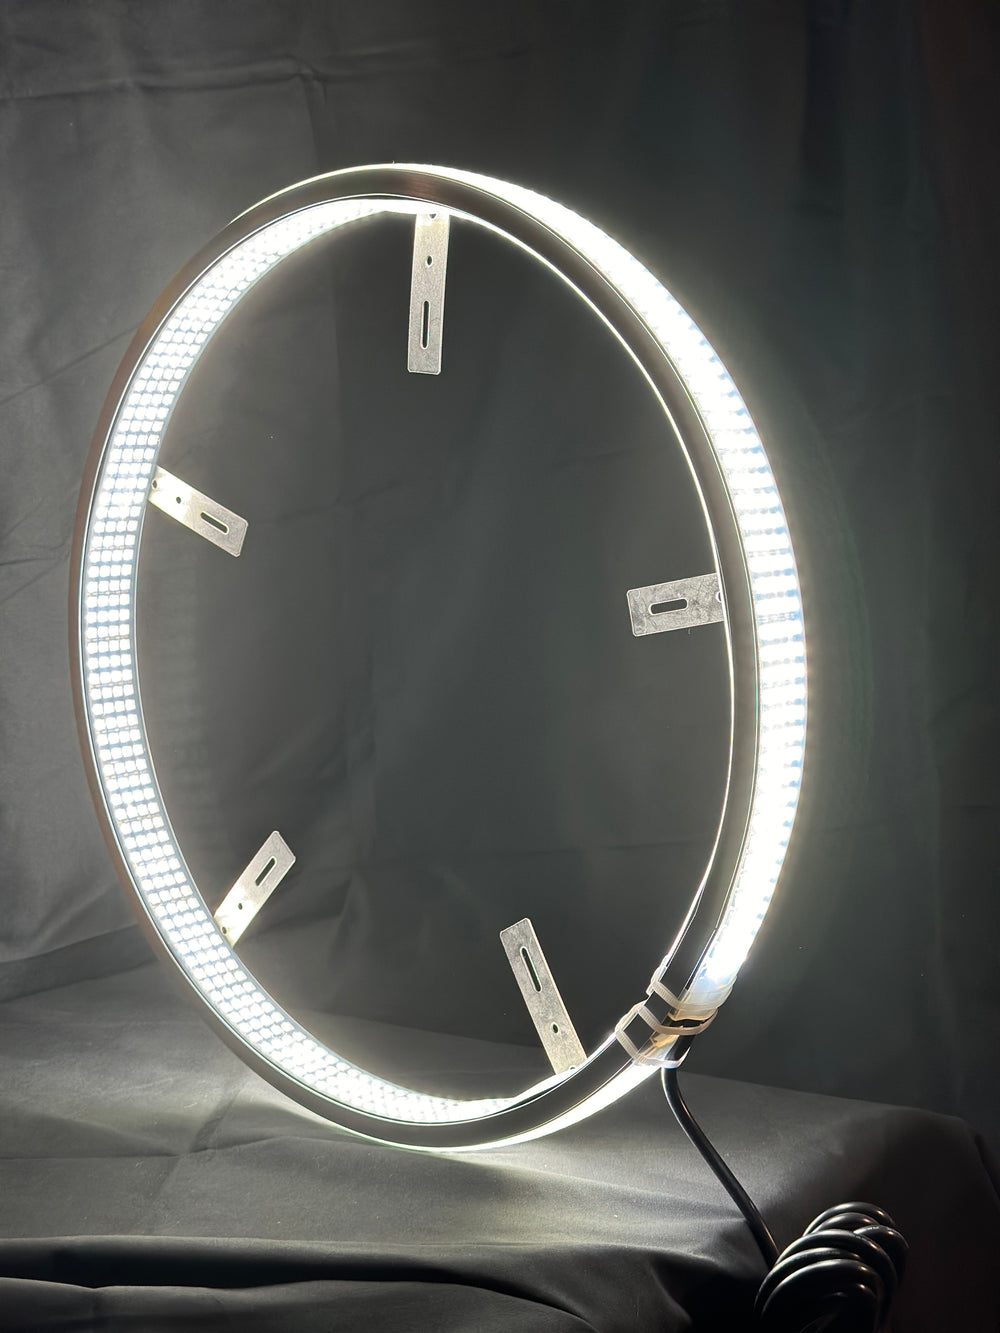 8 Row RGBW Wheel Lights(Pure White + Colored)